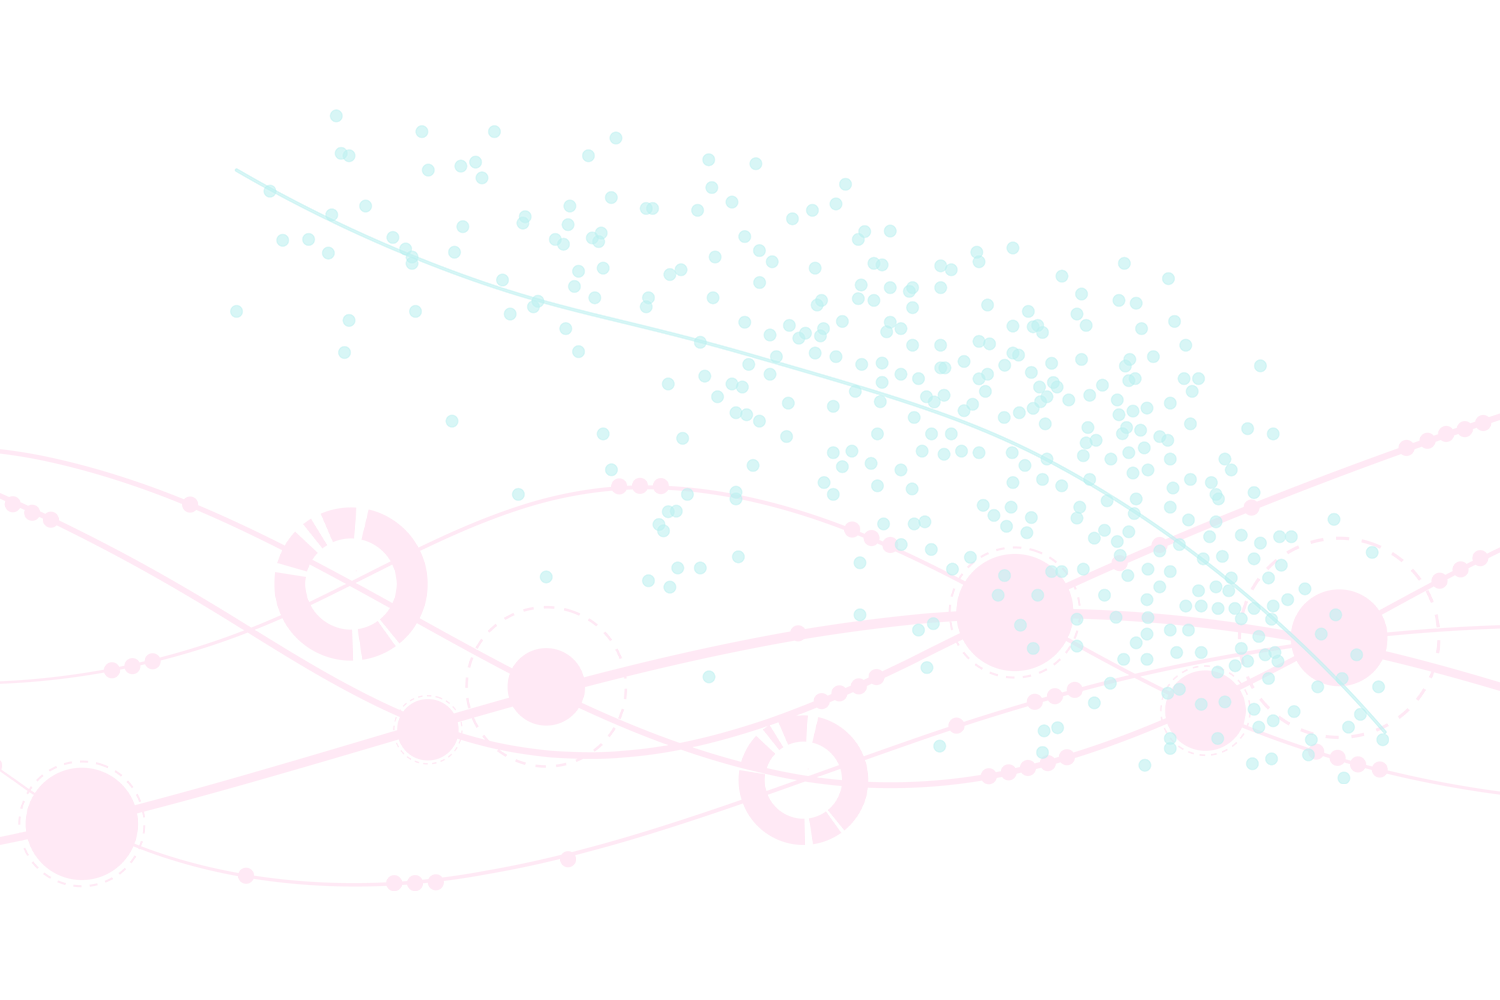 Aqua scatter plot with pink circles and waves